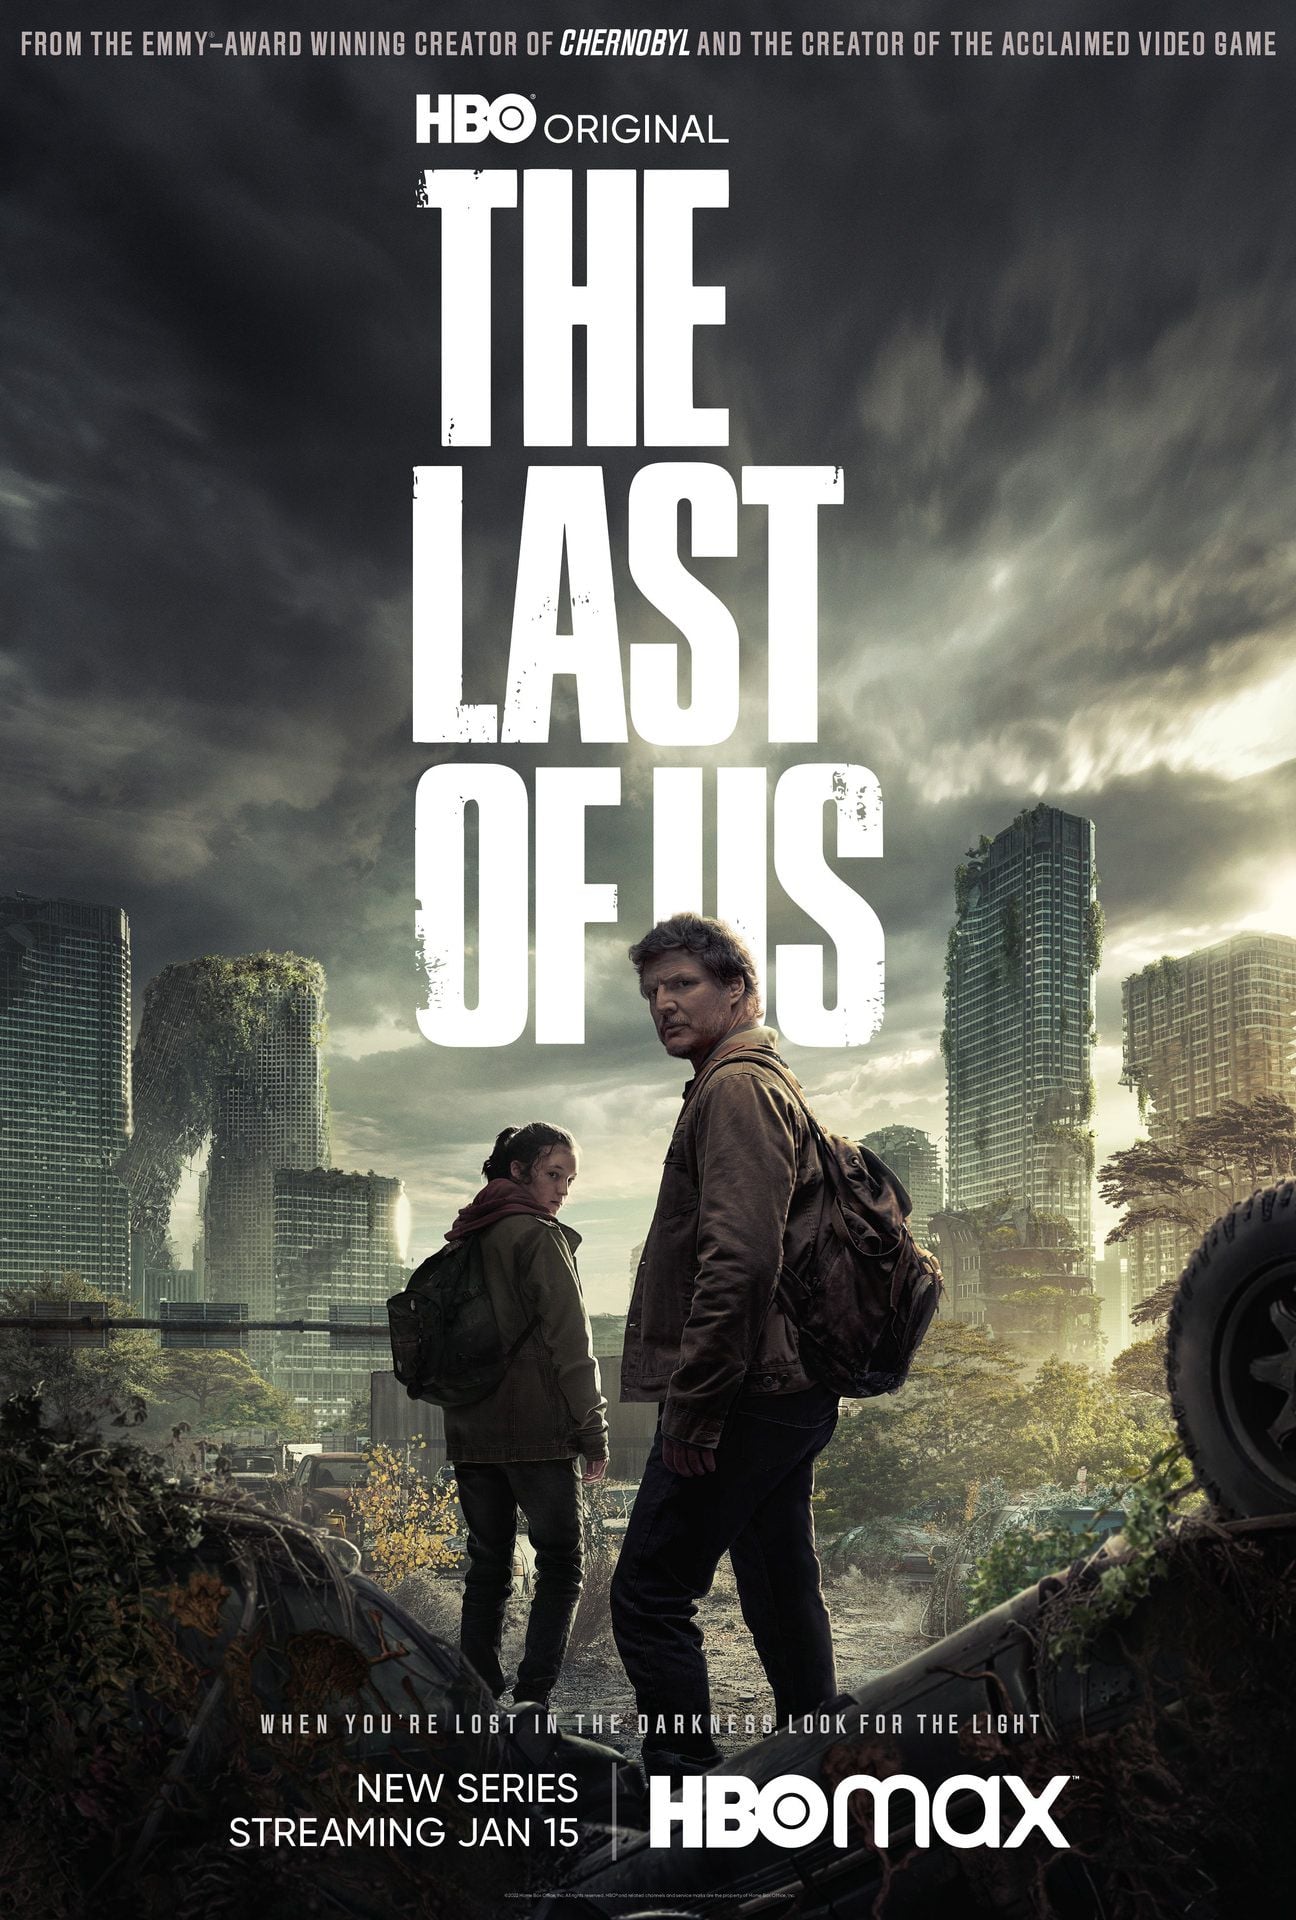 Why The DVD Sarah Borrows In The Last Of Us Episode 1 Means So Much To  Hard-Core Fans